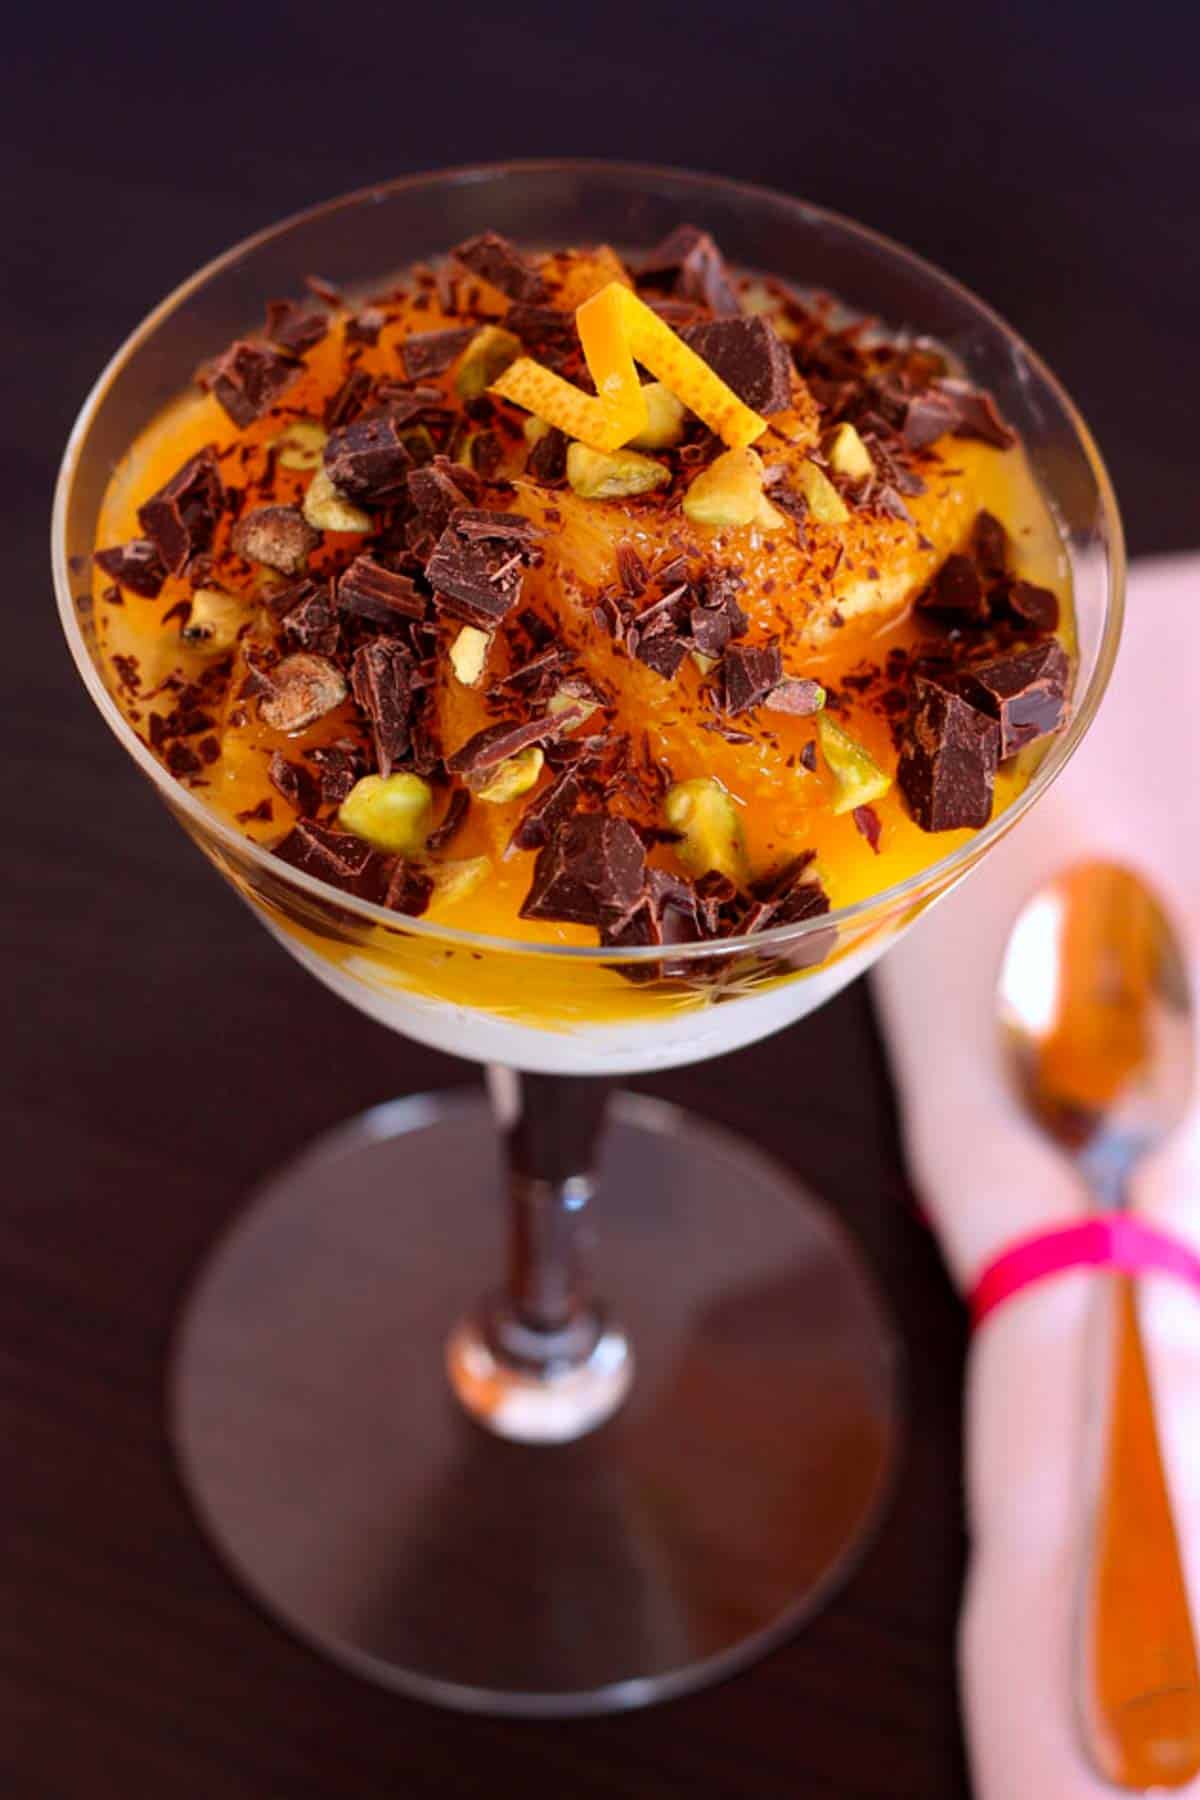 Looking down at an orange yogurt parfait topped with chopped pistachios and chocolate in a glass.